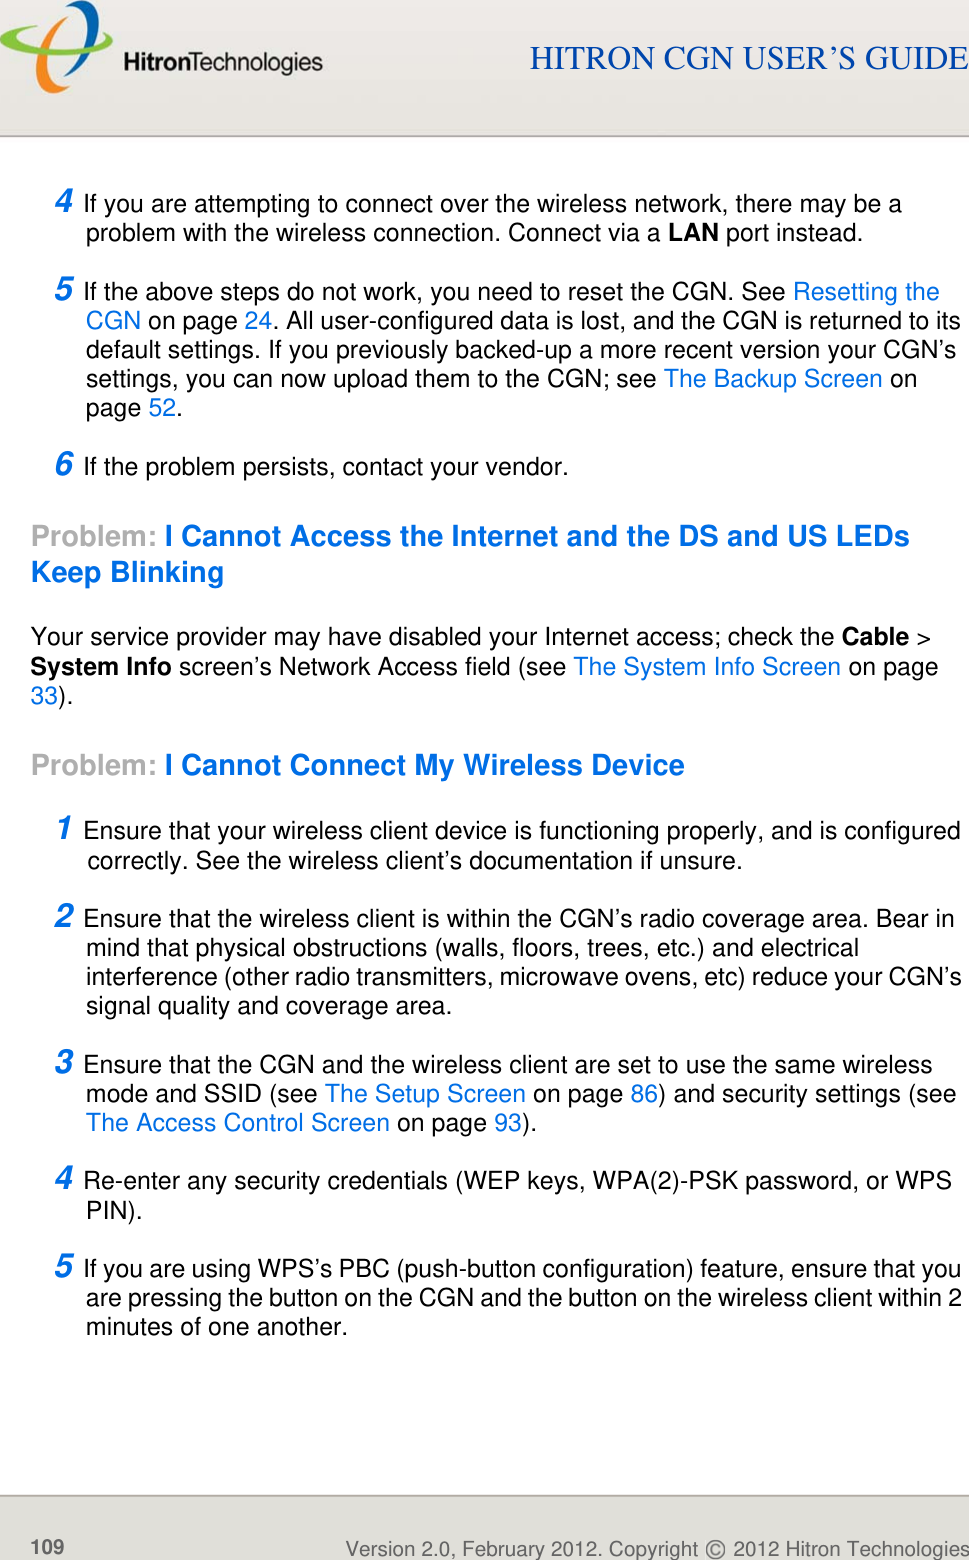 Version 2.0, February 2012. Copyright   2012 Hitron Technologies109Version 2.0, February 2012. Copyright   2012 Hitron Technologies109HITRON CGN USER’S GUIDE4 If you are attempting to connect over the wireless network, there may be a problem with the wireless connection. Connect via a LAN port instead.5 If the above steps do not work, you need to reset the CGN. See Resetting the CGN on page 24. All user-configured data is lost, and the CGN is returned to its default settings. If you previously backed-up a more recent version your CGN’s settings, you can now upload them to the CGN; see The Backup Screen on page 52.6 If the problem persists, contact your vendor.Problem: I Cannot Access the Internet and the DS and US LEDs Keep BlinkingYour service provider may have disabled your Internet access; check the Cable &gt; System Info screen’s Network Access field (see The System Info Screen on page 33).Problem: I Cannot Connect My Wireless Device1 Ensure that your wireless client device is functioning properly, and is configured correctly. See the wireless client’s documentation if unsure.2 Ensure that the wireless client is within the CGN’s radio coverage area. Bear in mind that physical obstructions (walls, floors, trees, etc.) and electrical interference (other radio transmitters, microwave ovens, etc) reduce your CGN’s signal quality and coverage area.3 Ensure that the CGN and the wireless client are set to use the same wireless mode and SSID (see The Setup Screen on page 86) and security settings (see The Access Control Screen on page 93).4 Re-enter any security credentials (WEP keys, WPA(2)-PSK password, or WPS PIN).5 If you are using WPS’s PBC (push-button configuration) feature, ensure that you are pressing the button on the CGN and the button on the wireless client within 2 minutes of one another.